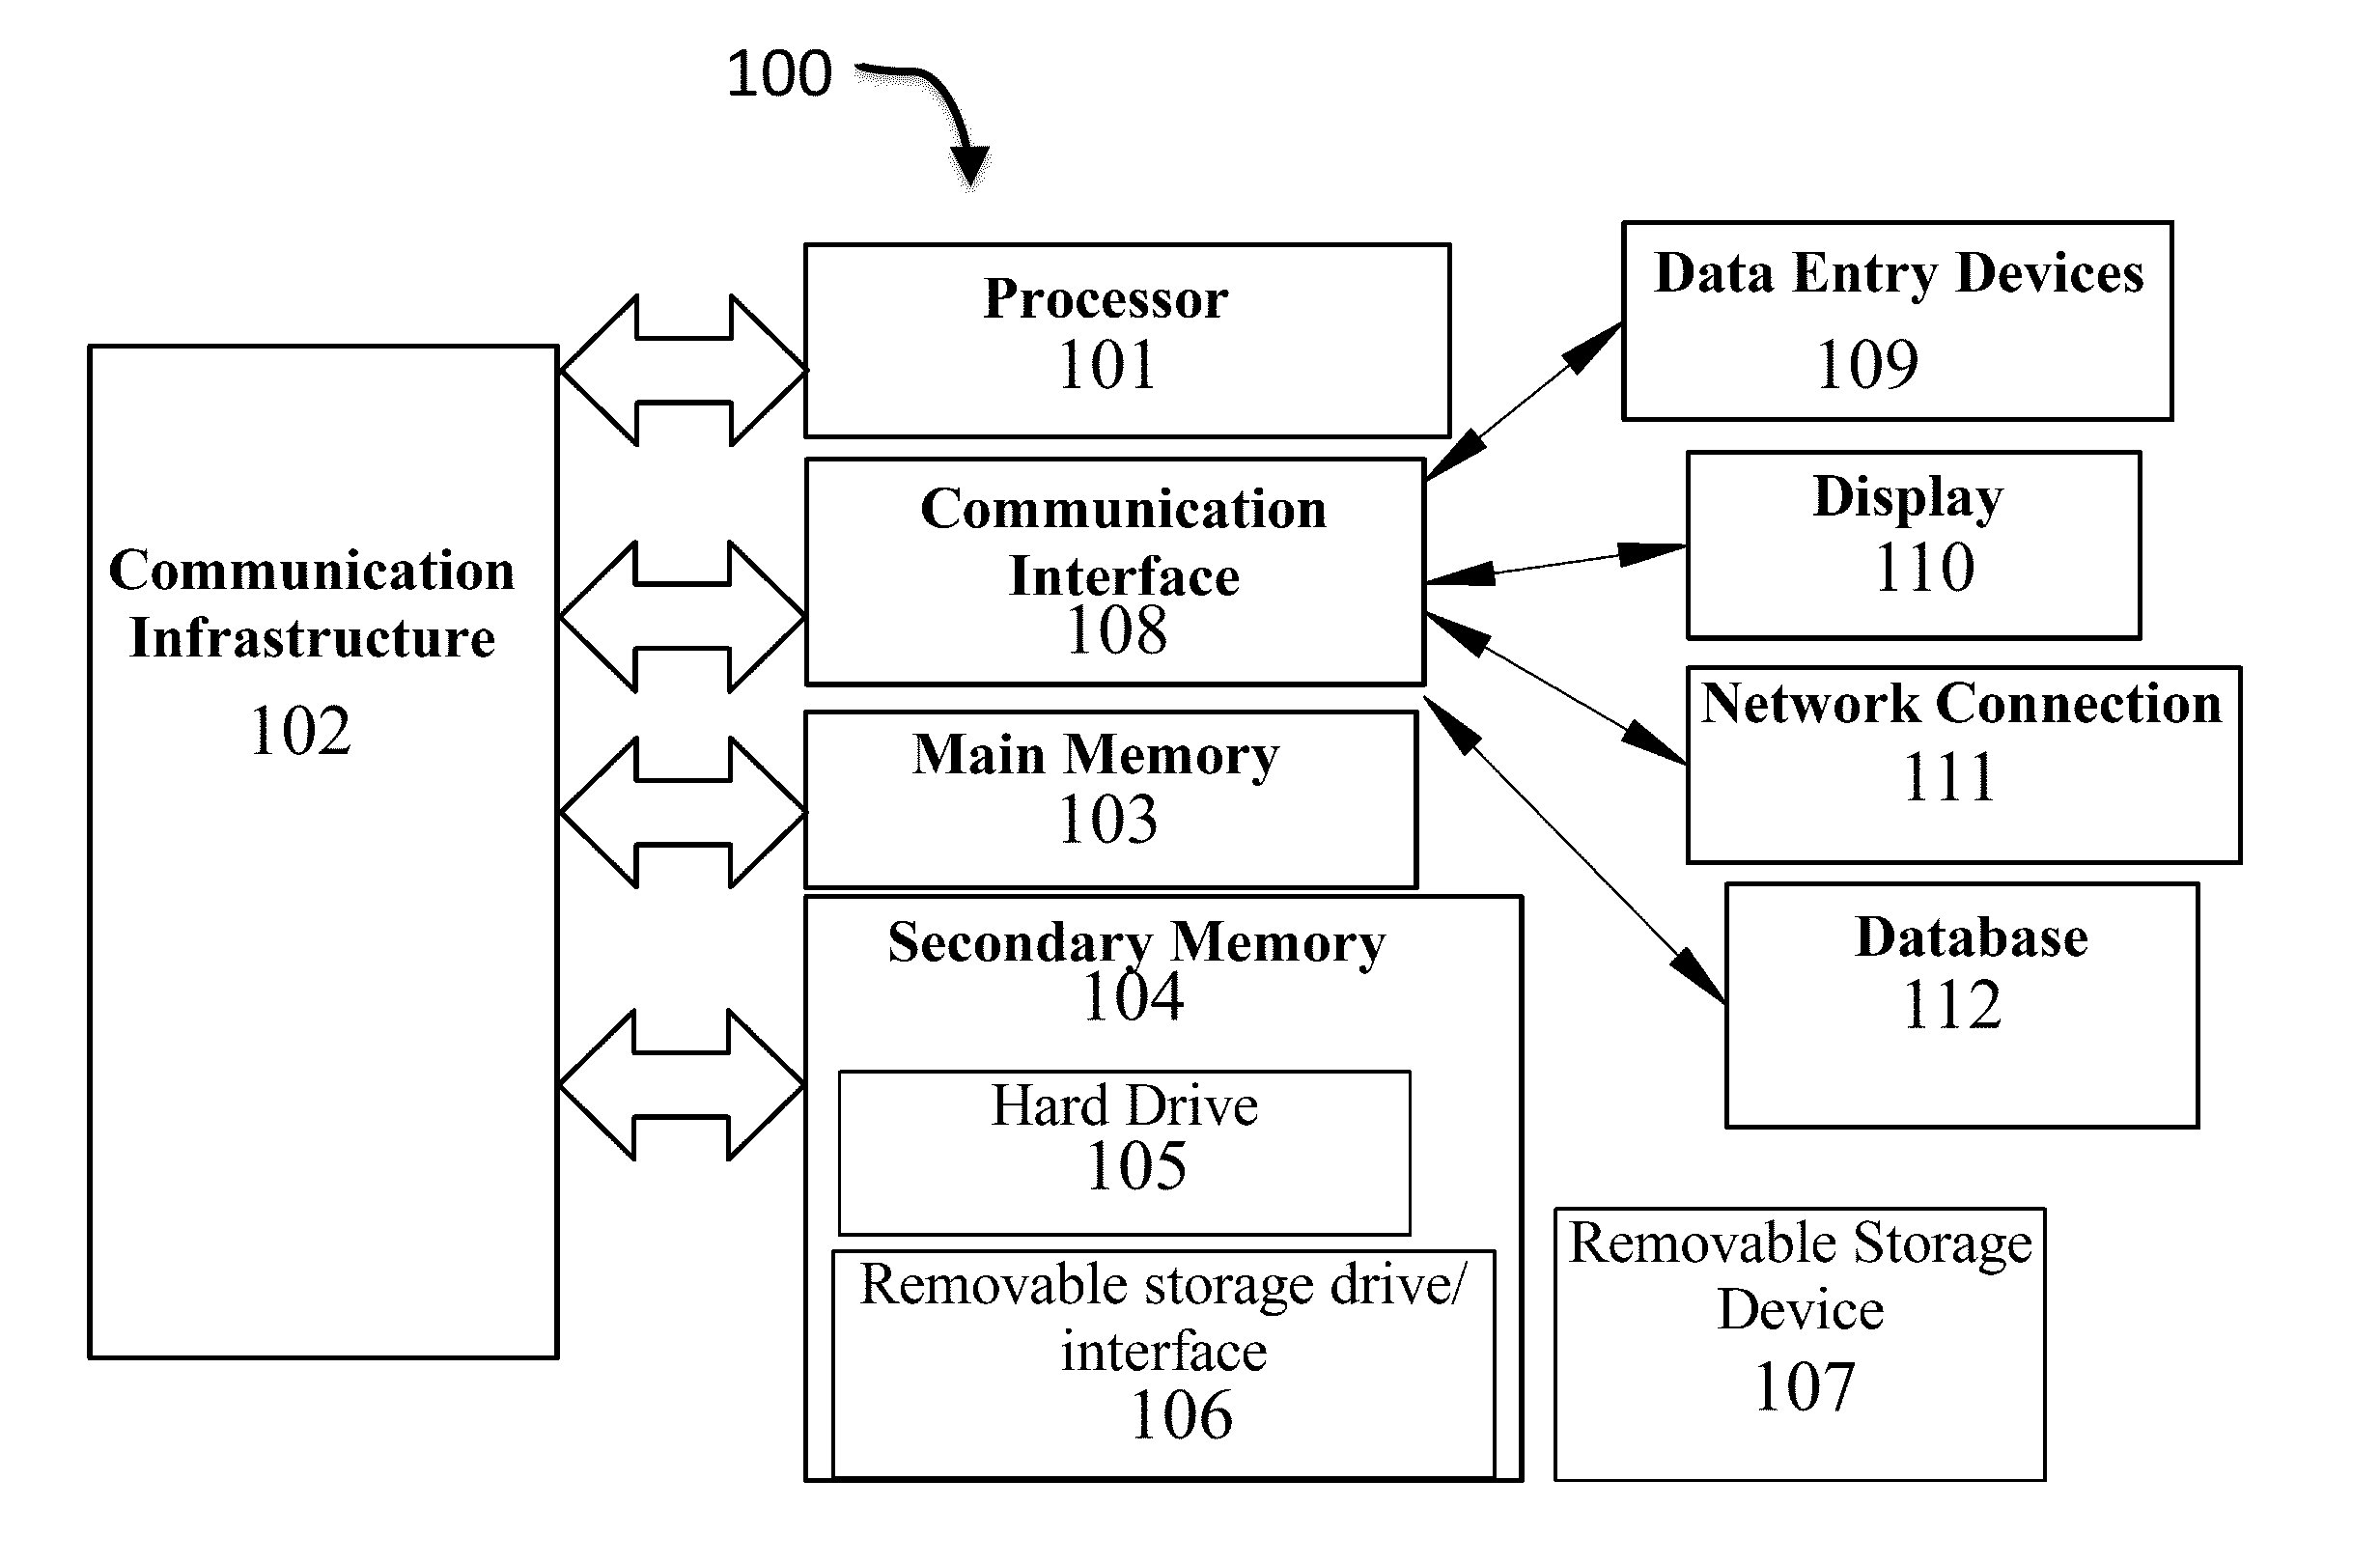 System and Method for Block-Chain Verification of Goods